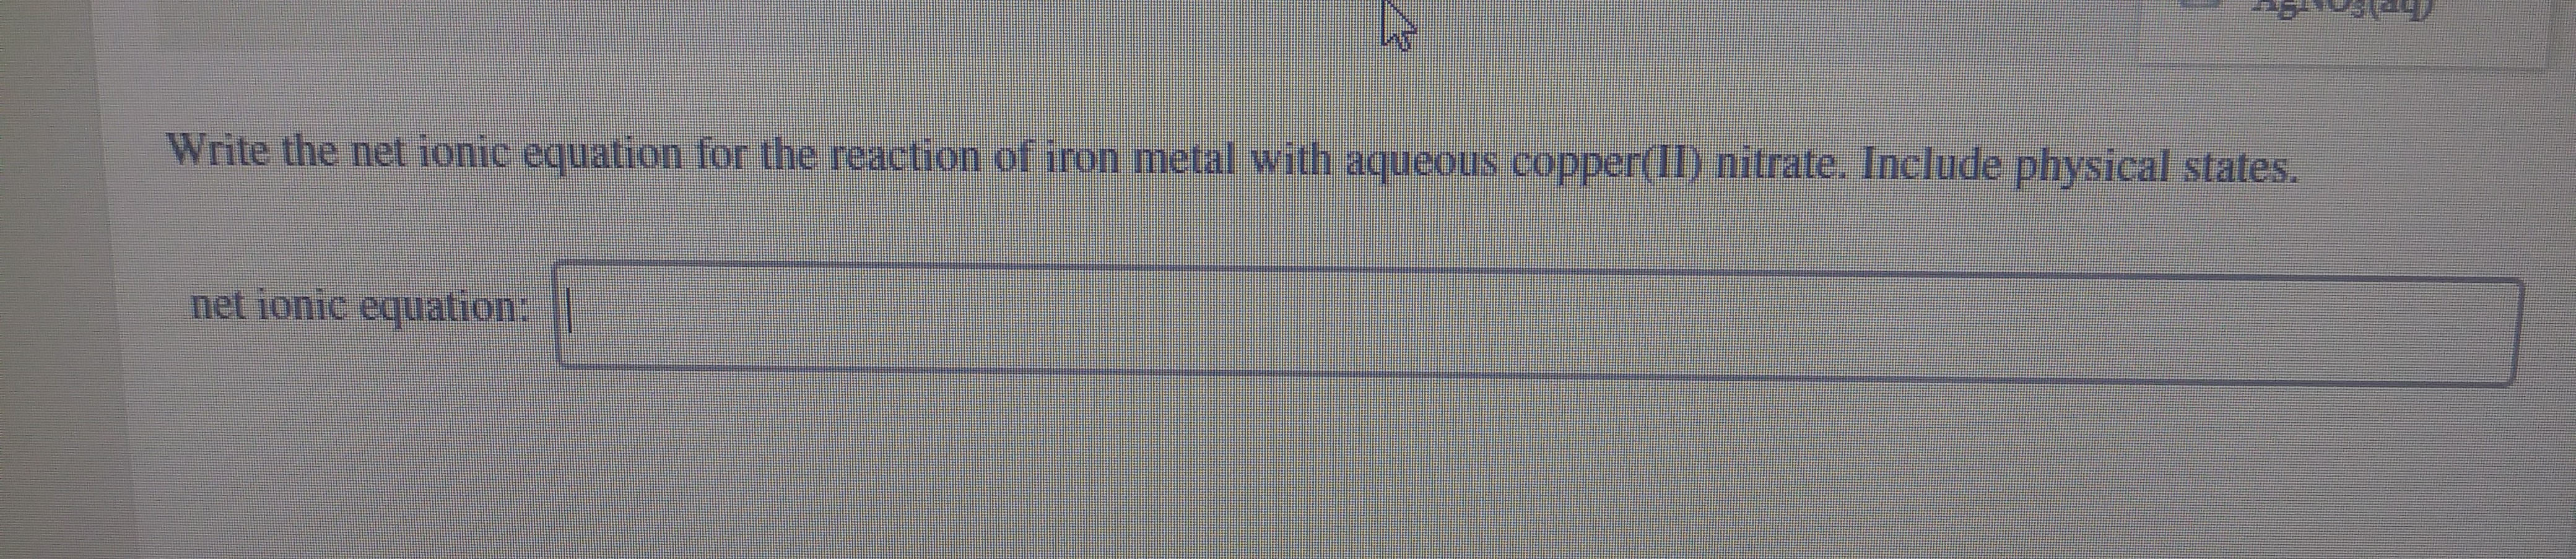 Write the net ionic equation for the reaction of iron metal with aqueous copper(II) nitrate. Include physical states.
net ionic equation: ||
